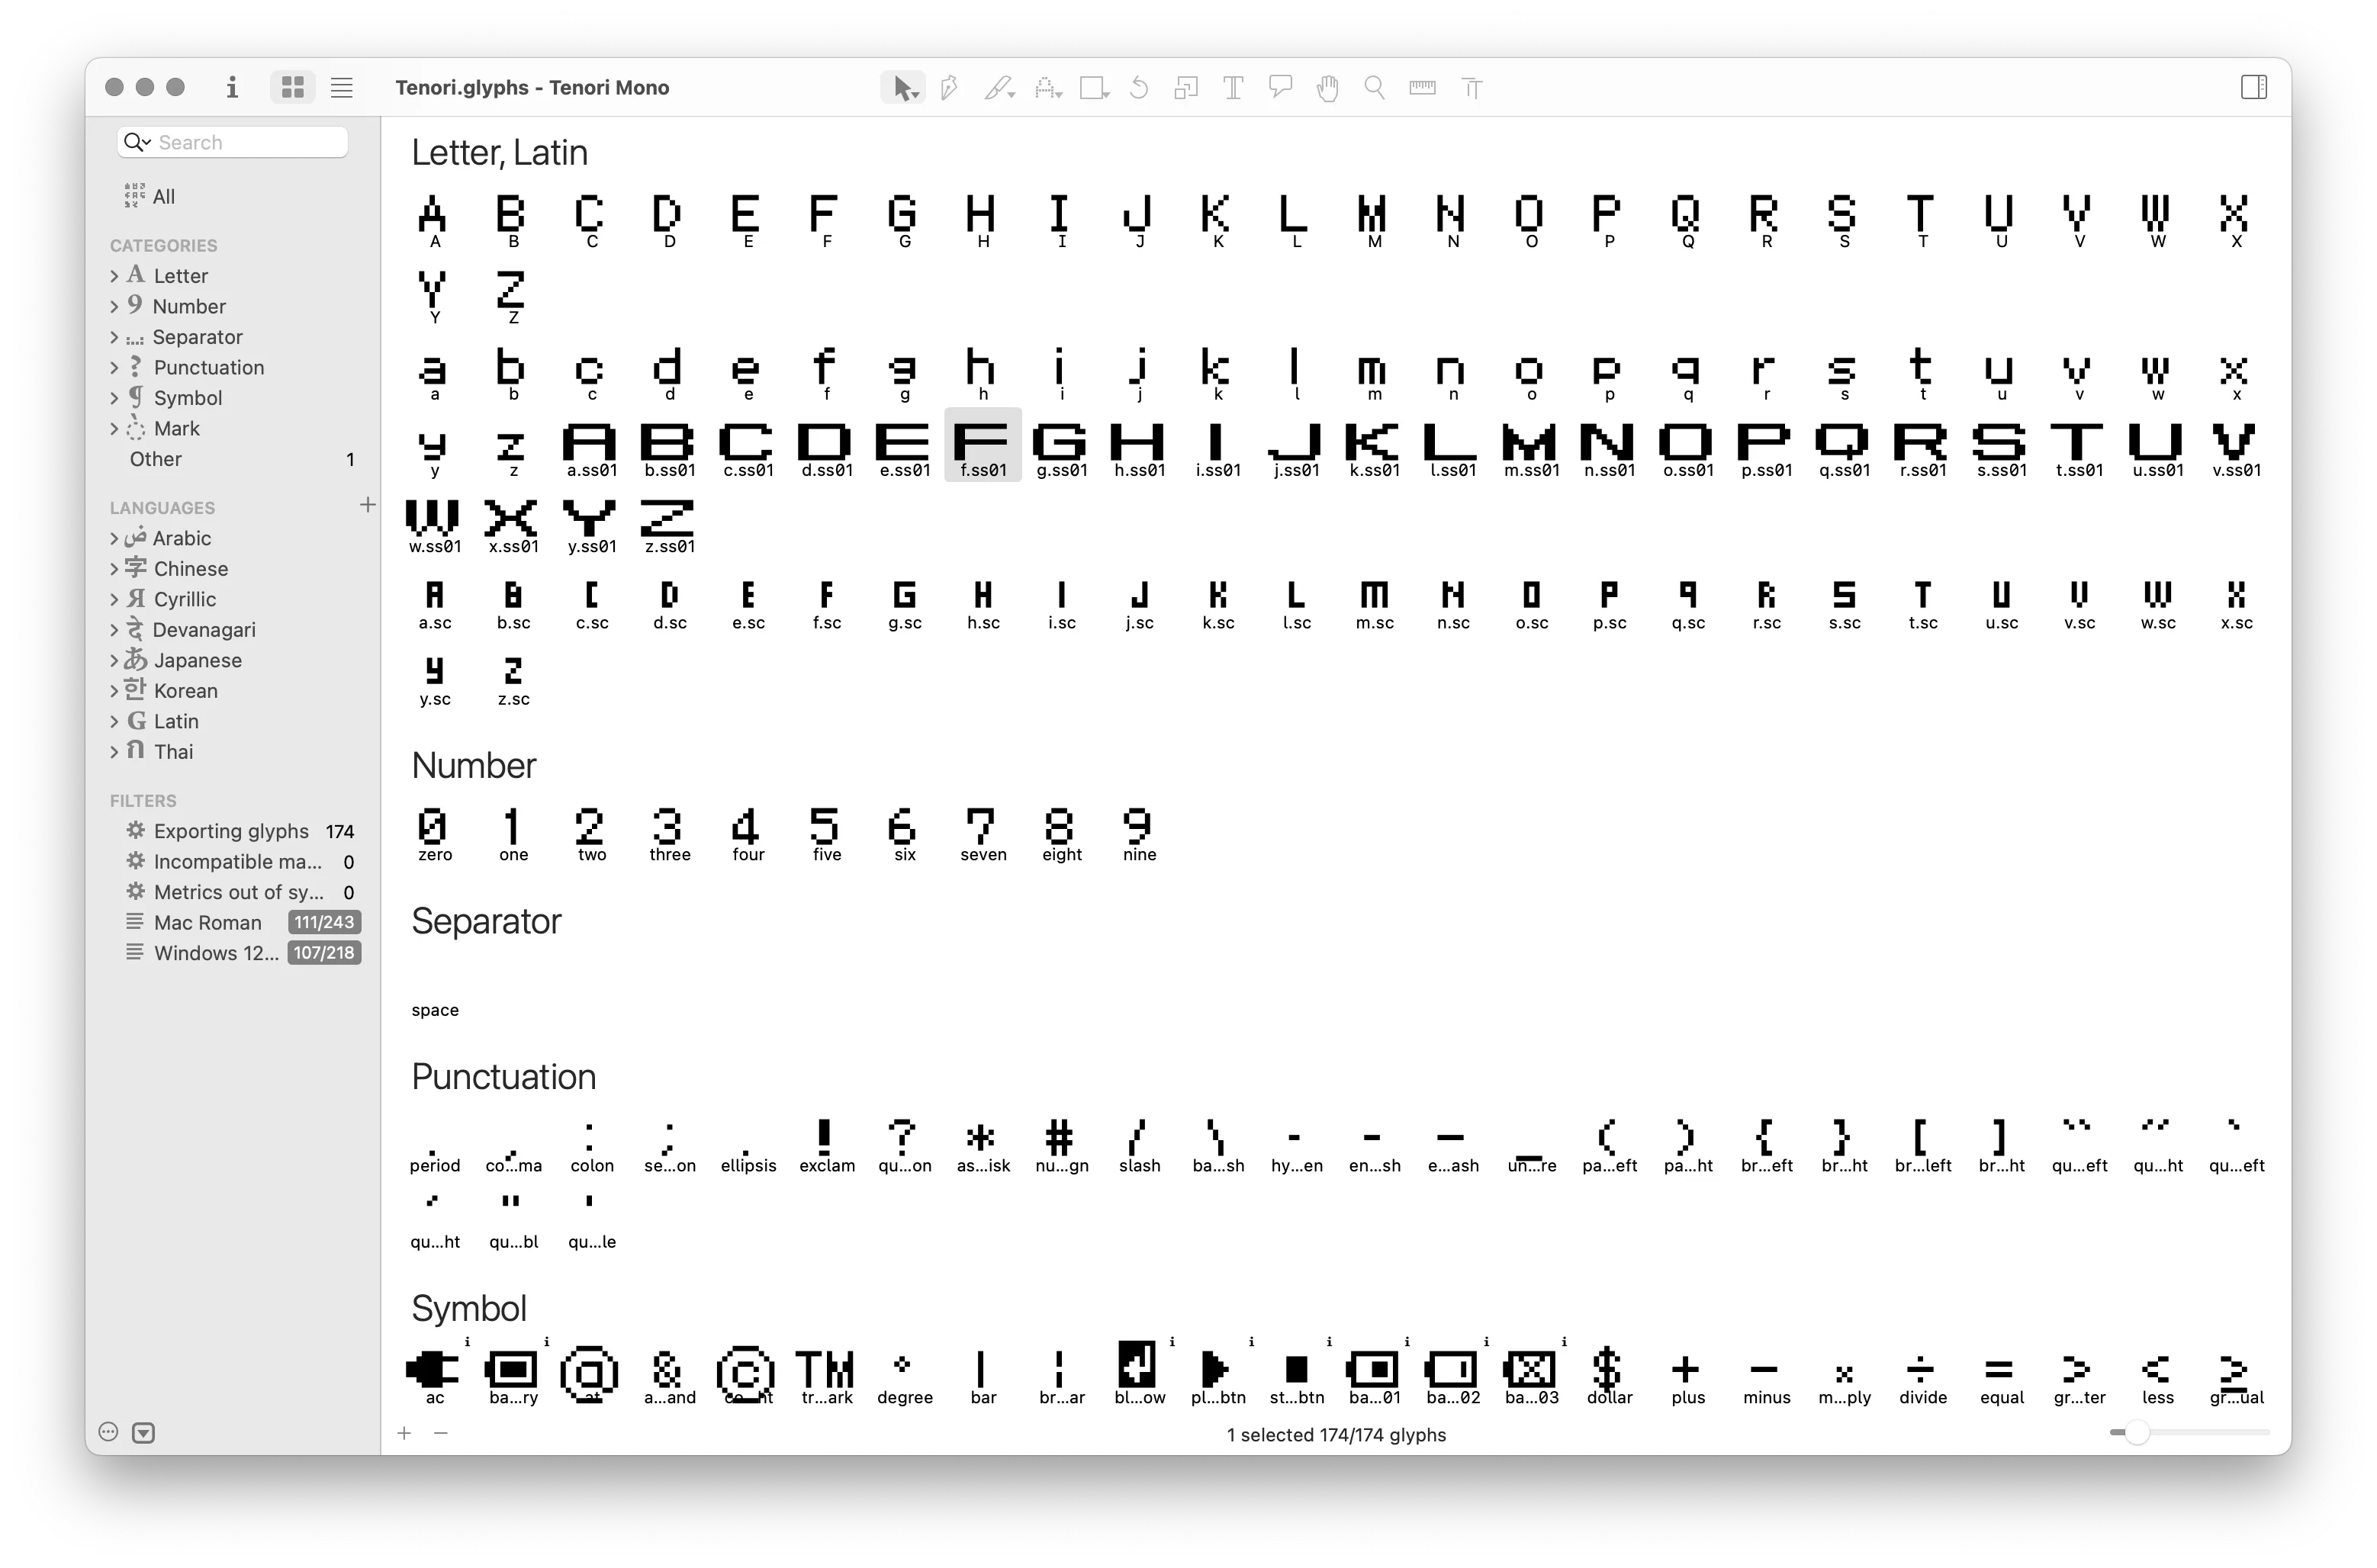 A screenshot of the app 'Glpyhs' featuring some Latin glyphs of Tenori, including various punctuation marks.